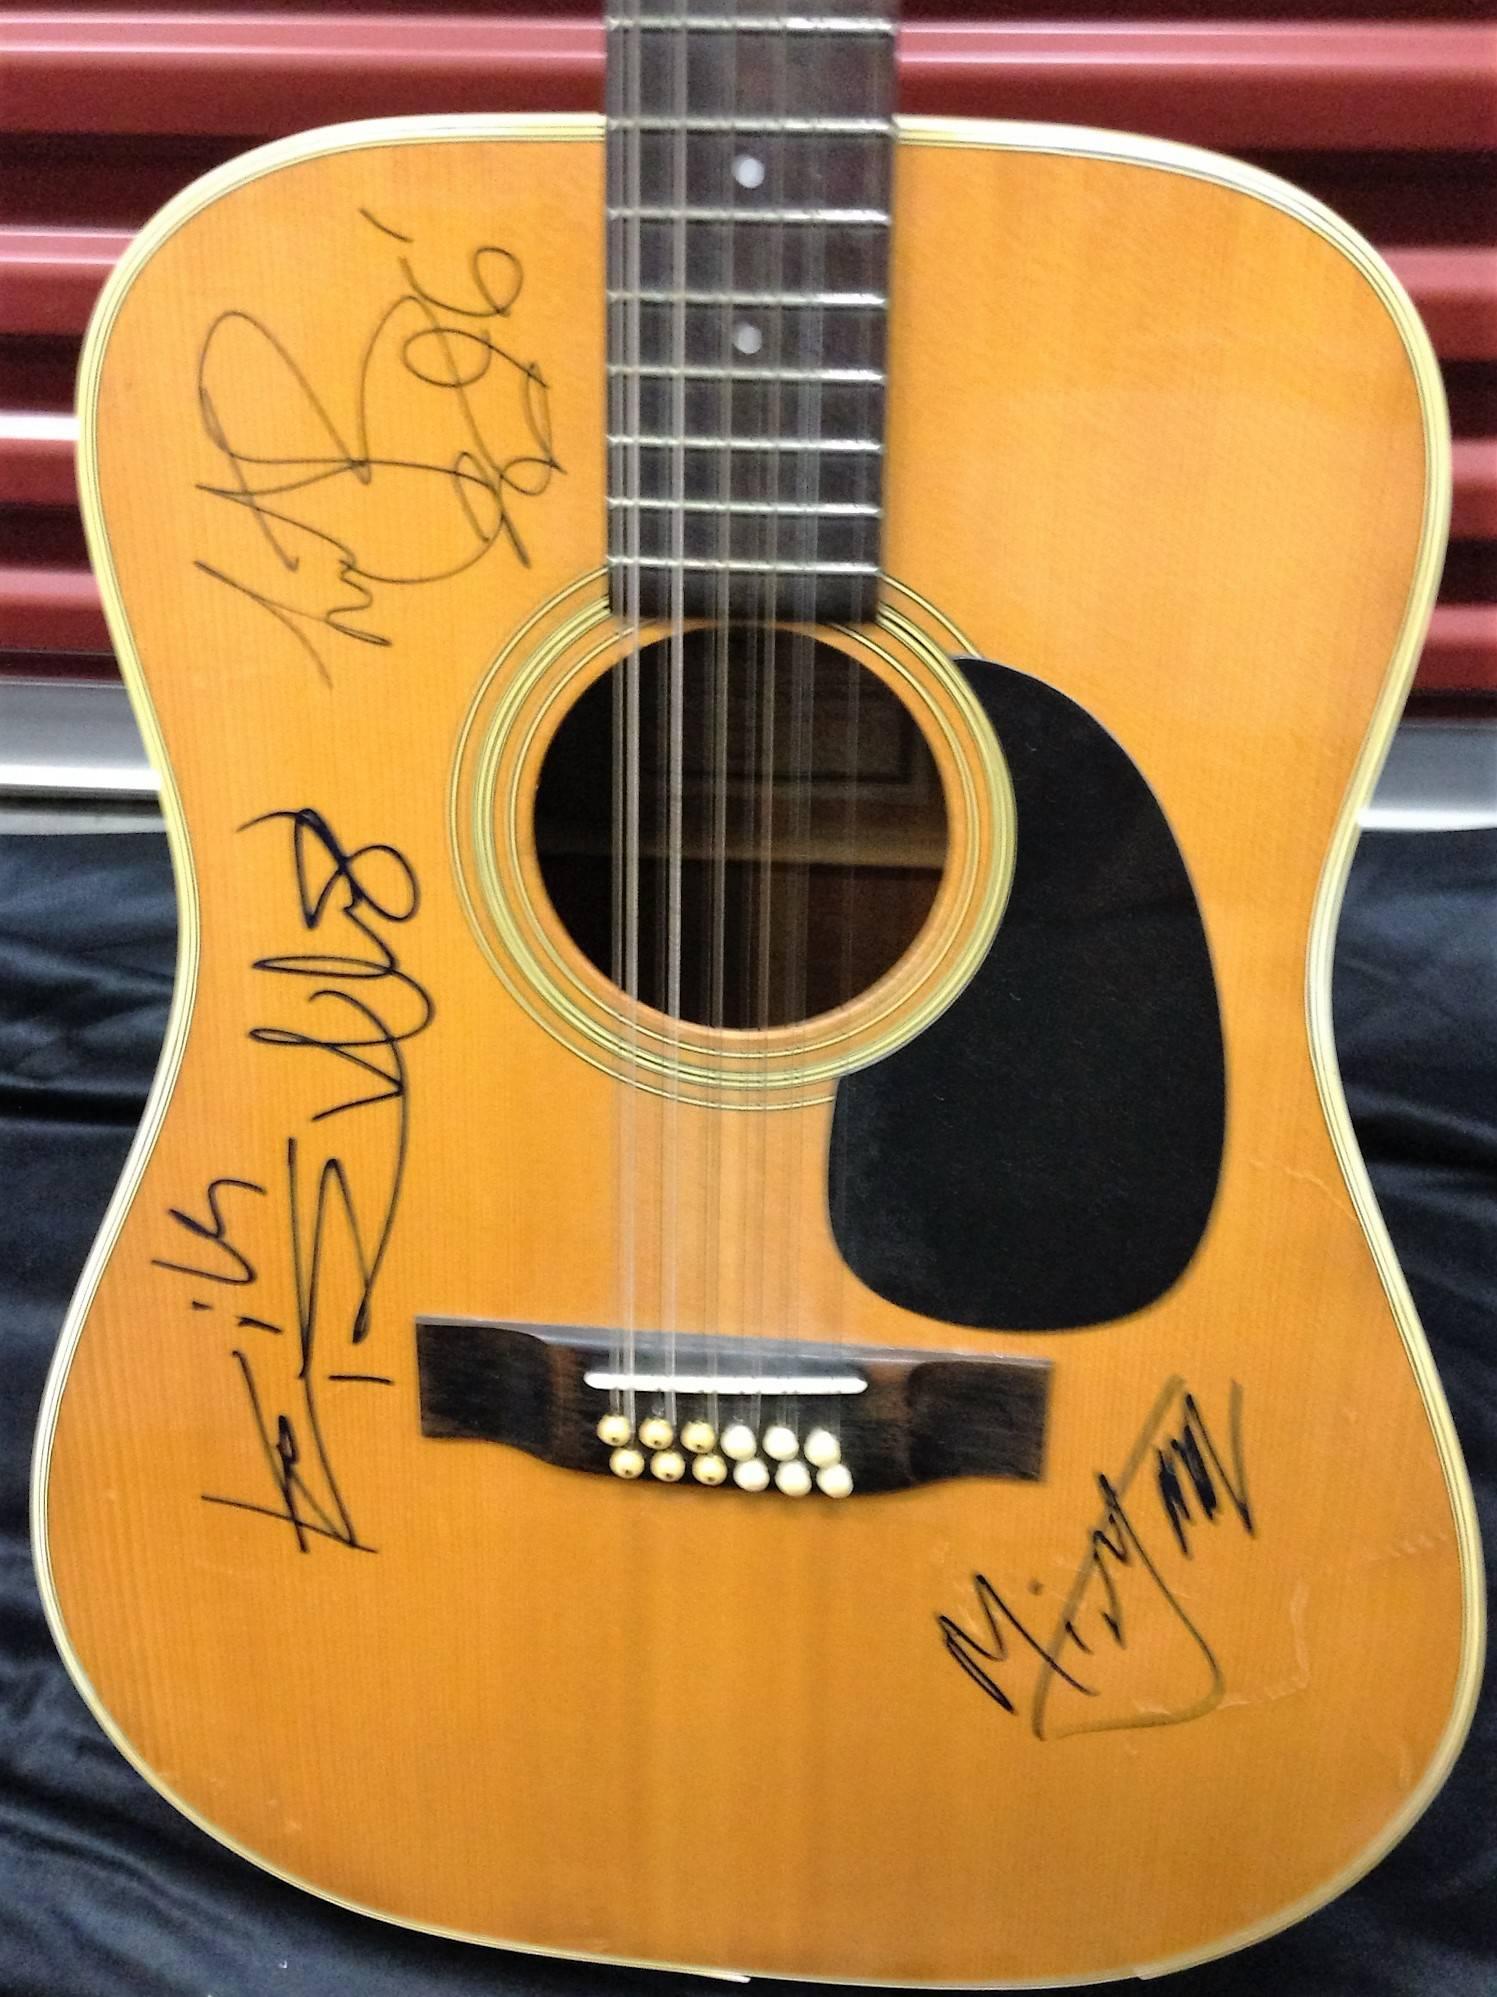 rolling stones signed guitar